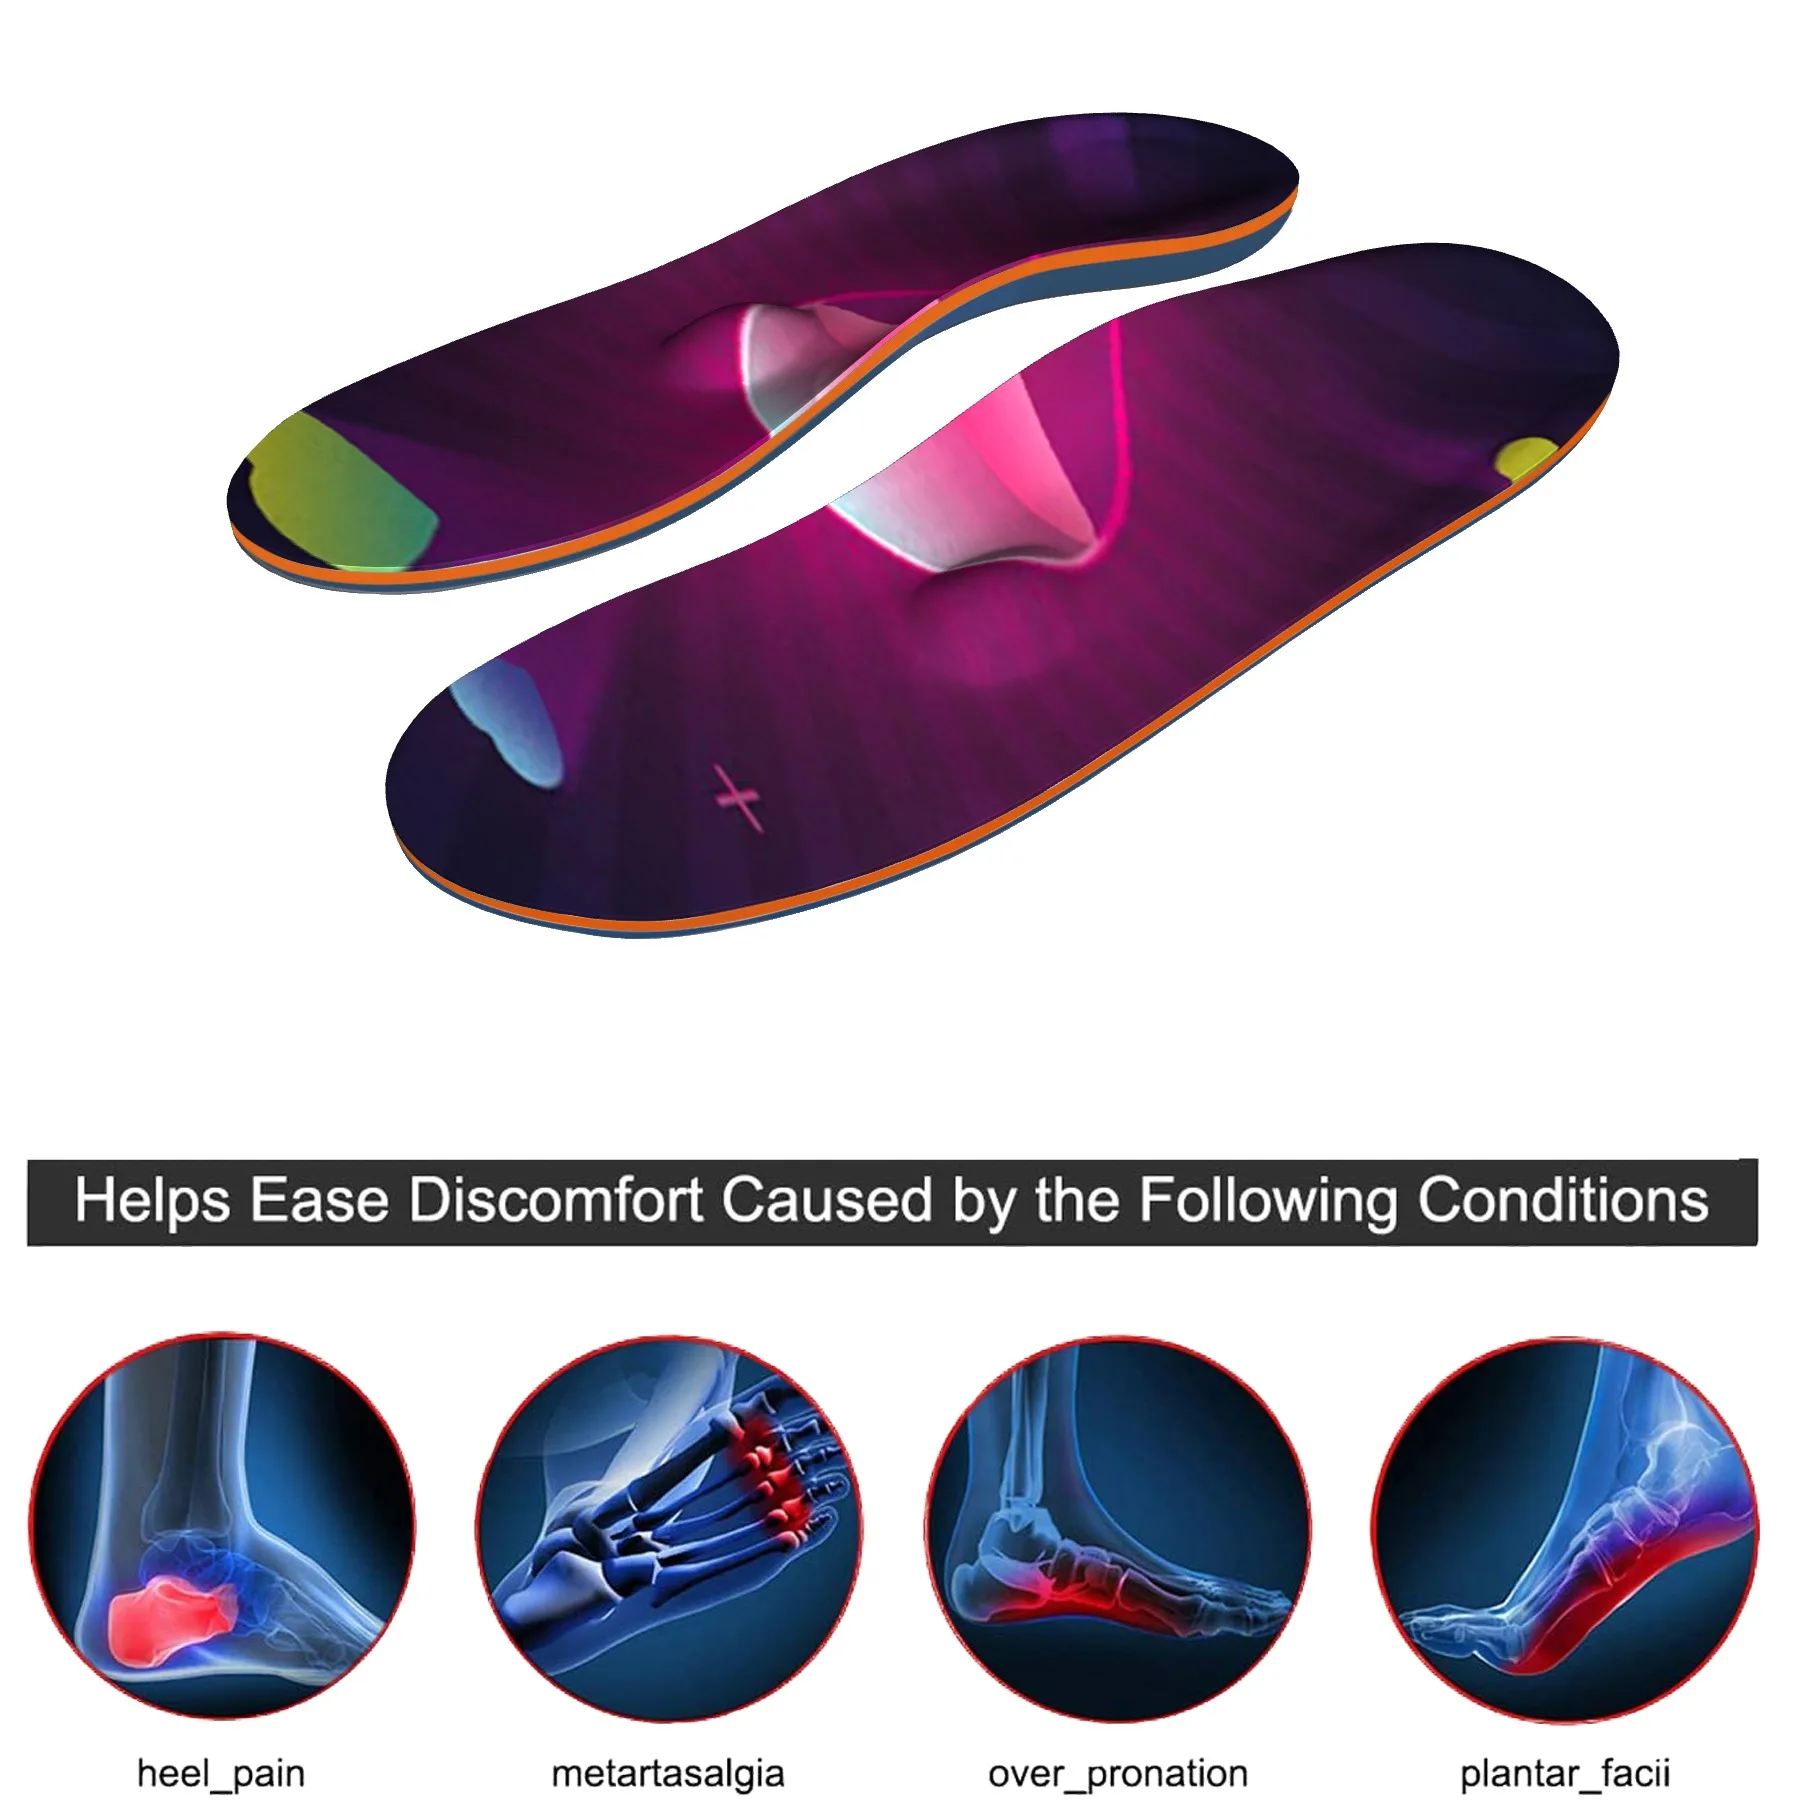 Plantar Fasciitis, Arch Support, Sports Soles, Flat Foot Pain, Heel Spurs, Orthopedic Pads, Orthopedic Insoles, Sports Shoes For